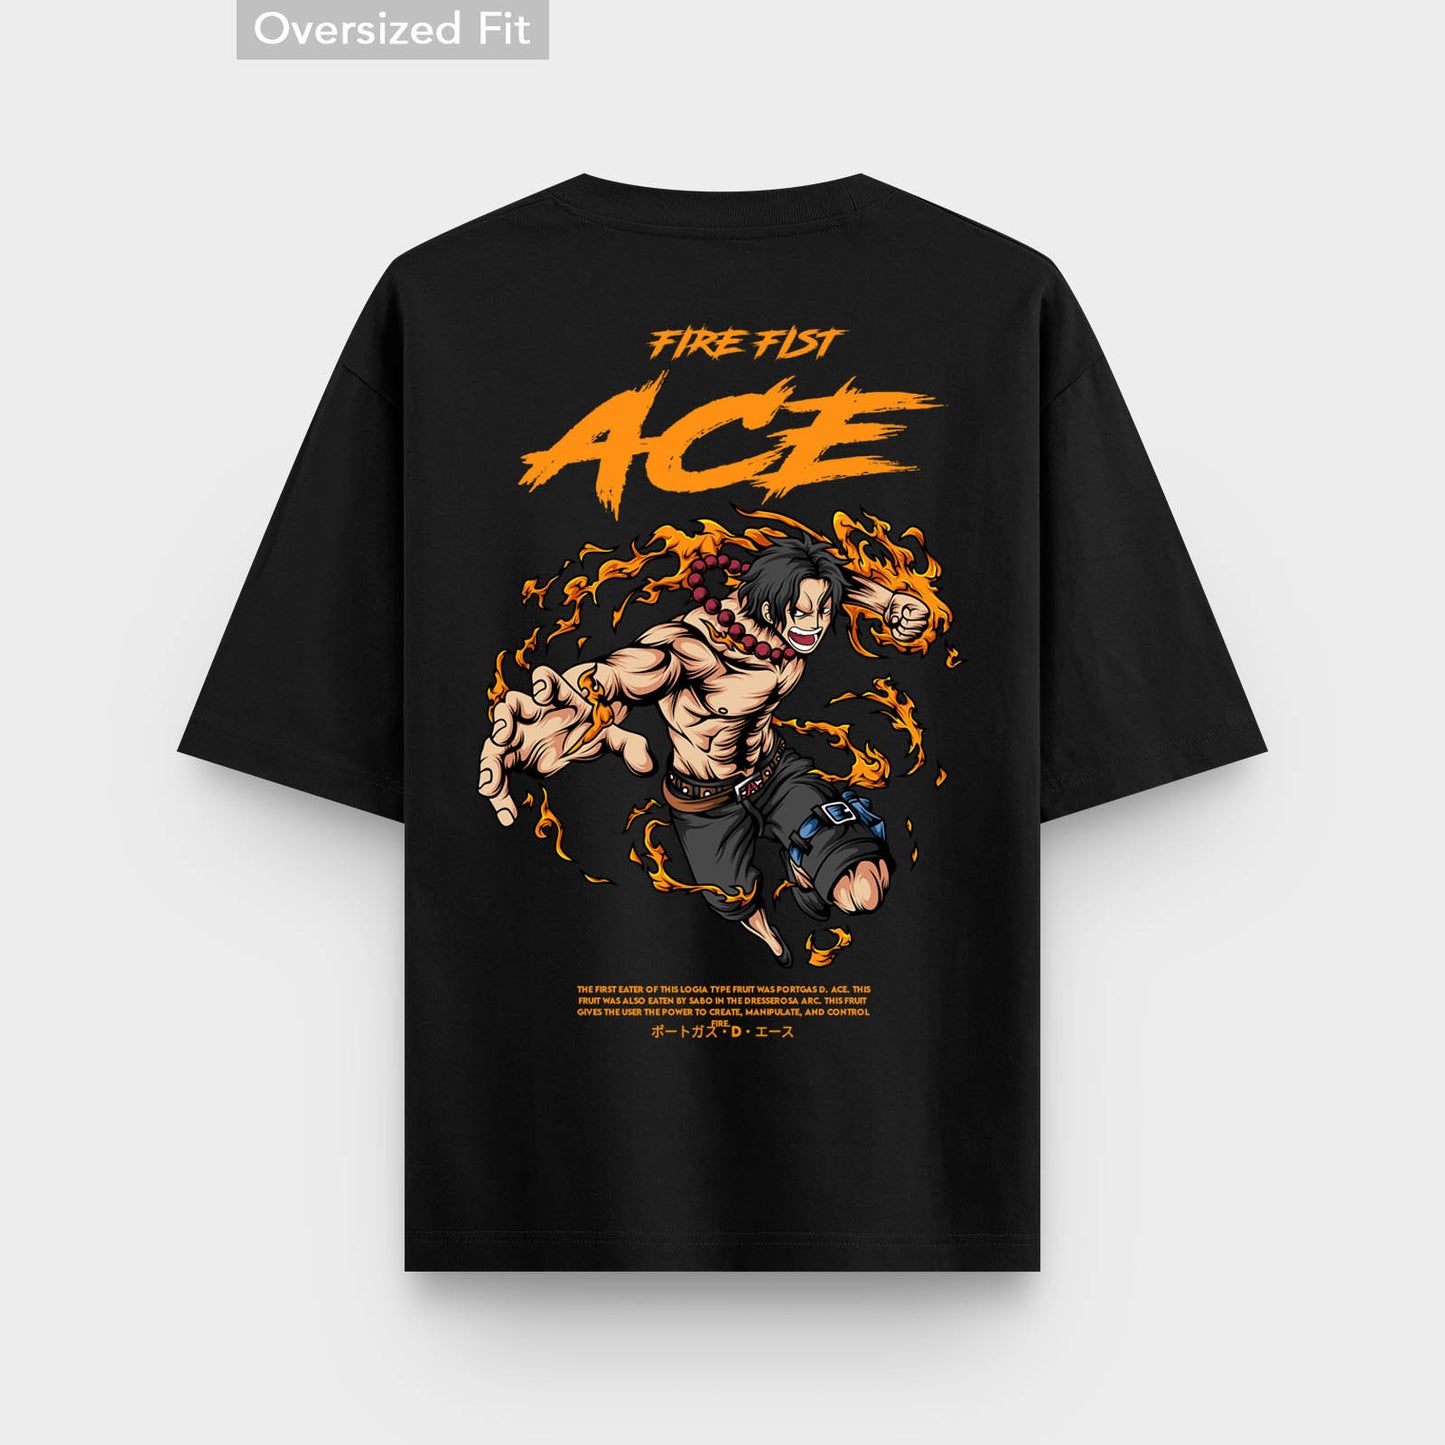 Unstoppable fire of Ace with this premium One Piece oversized T-shirt